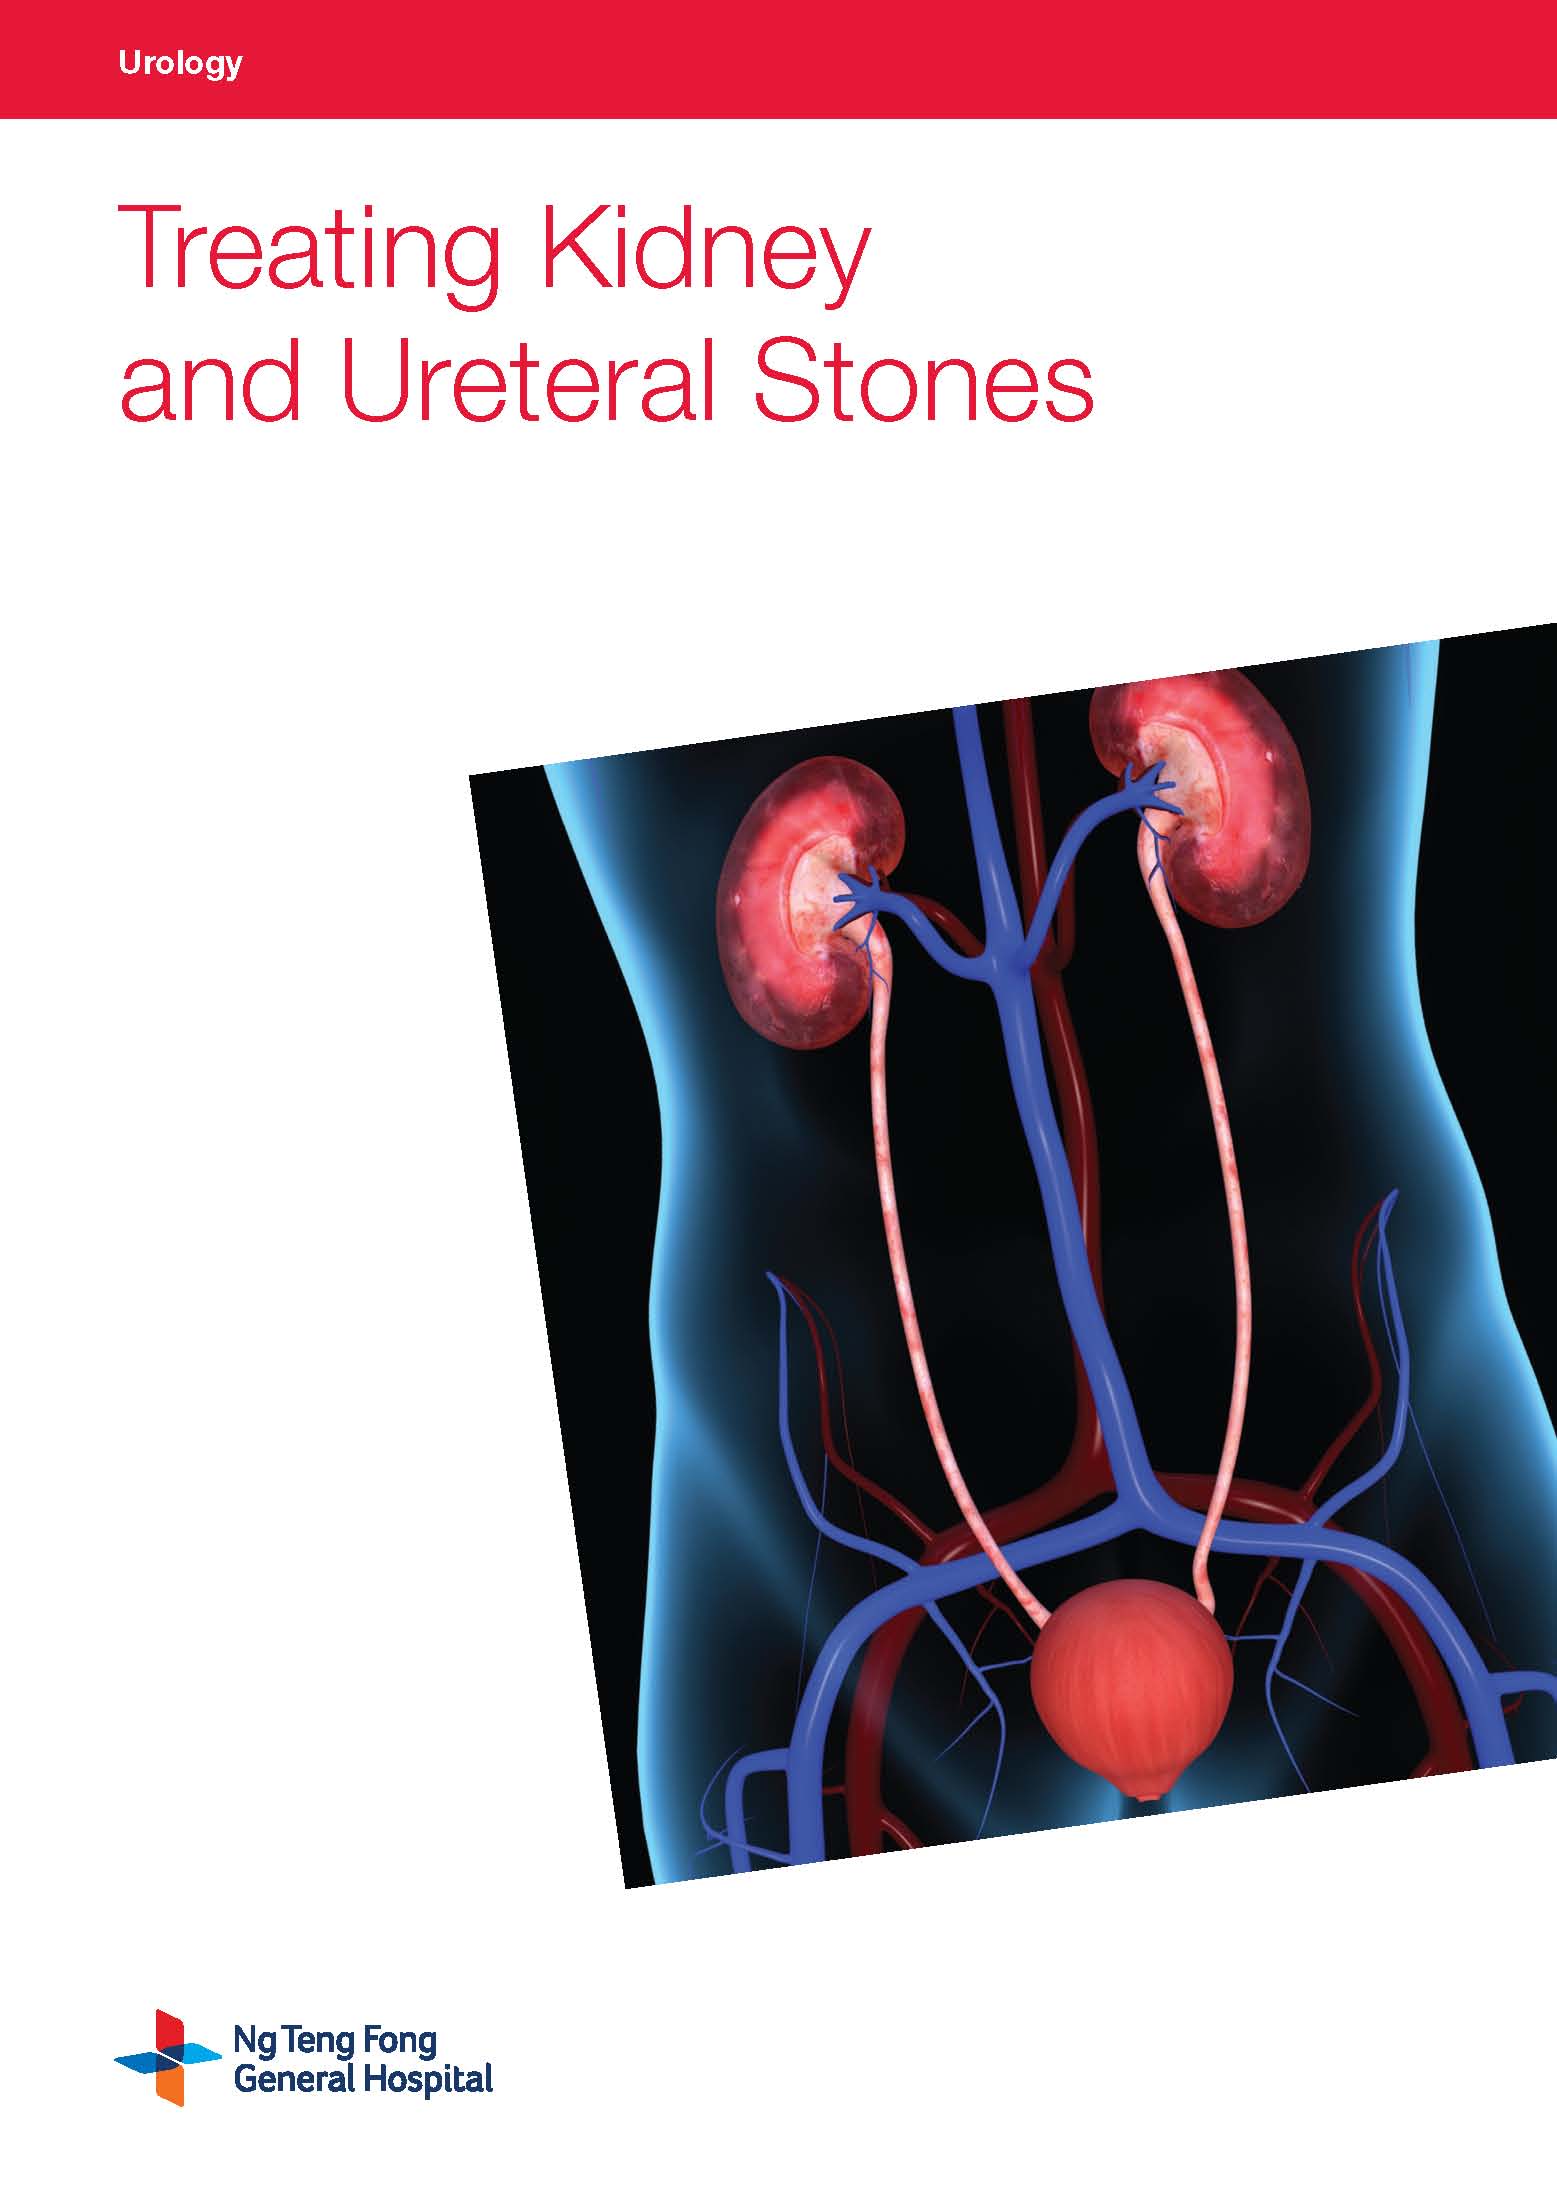 Treating Kidney and Ureteral Stones